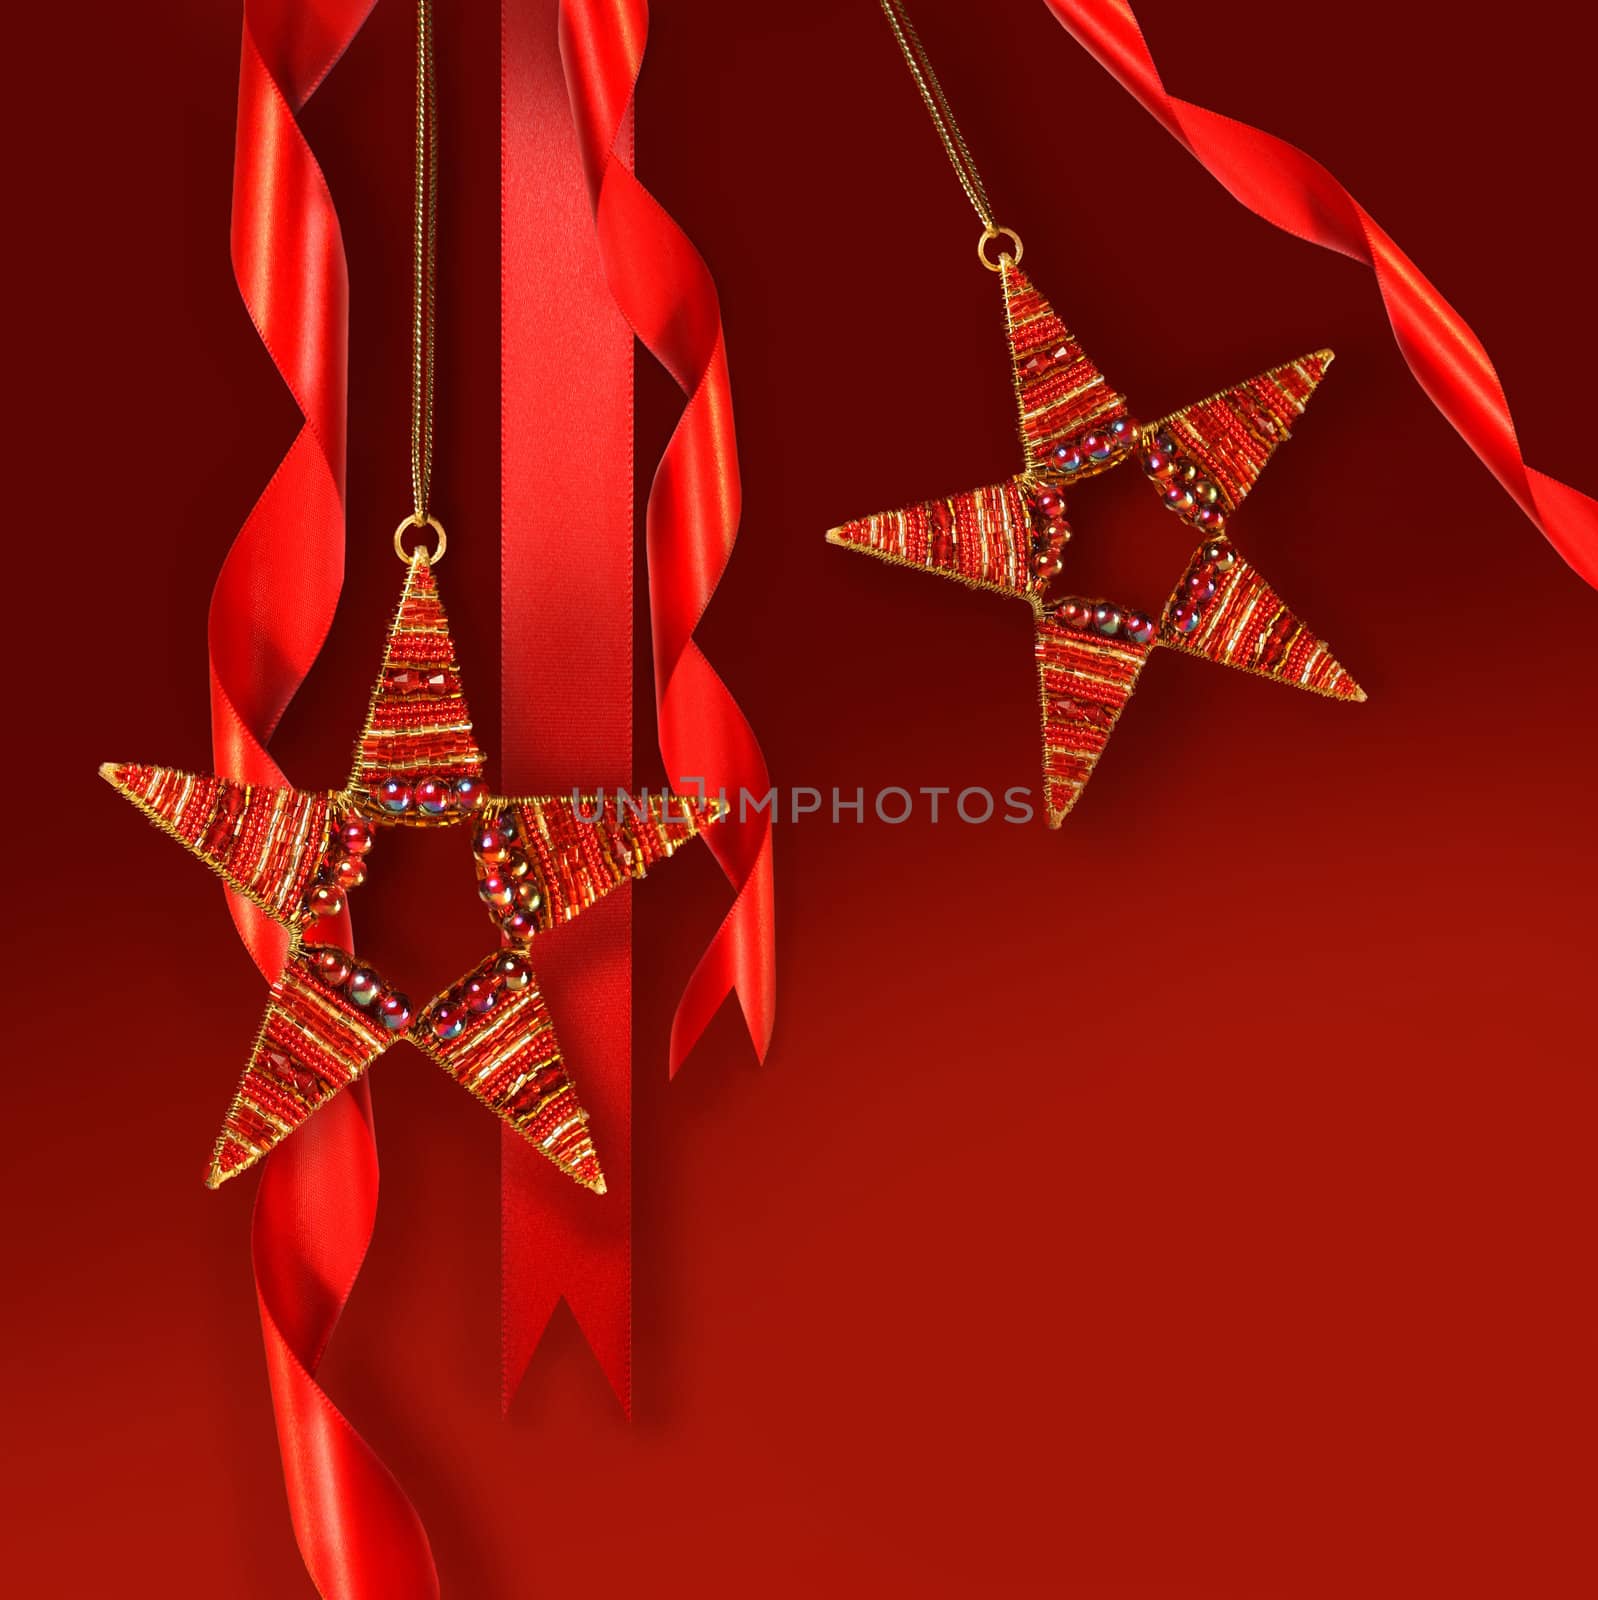 Christmas star ornaments against red holiday background